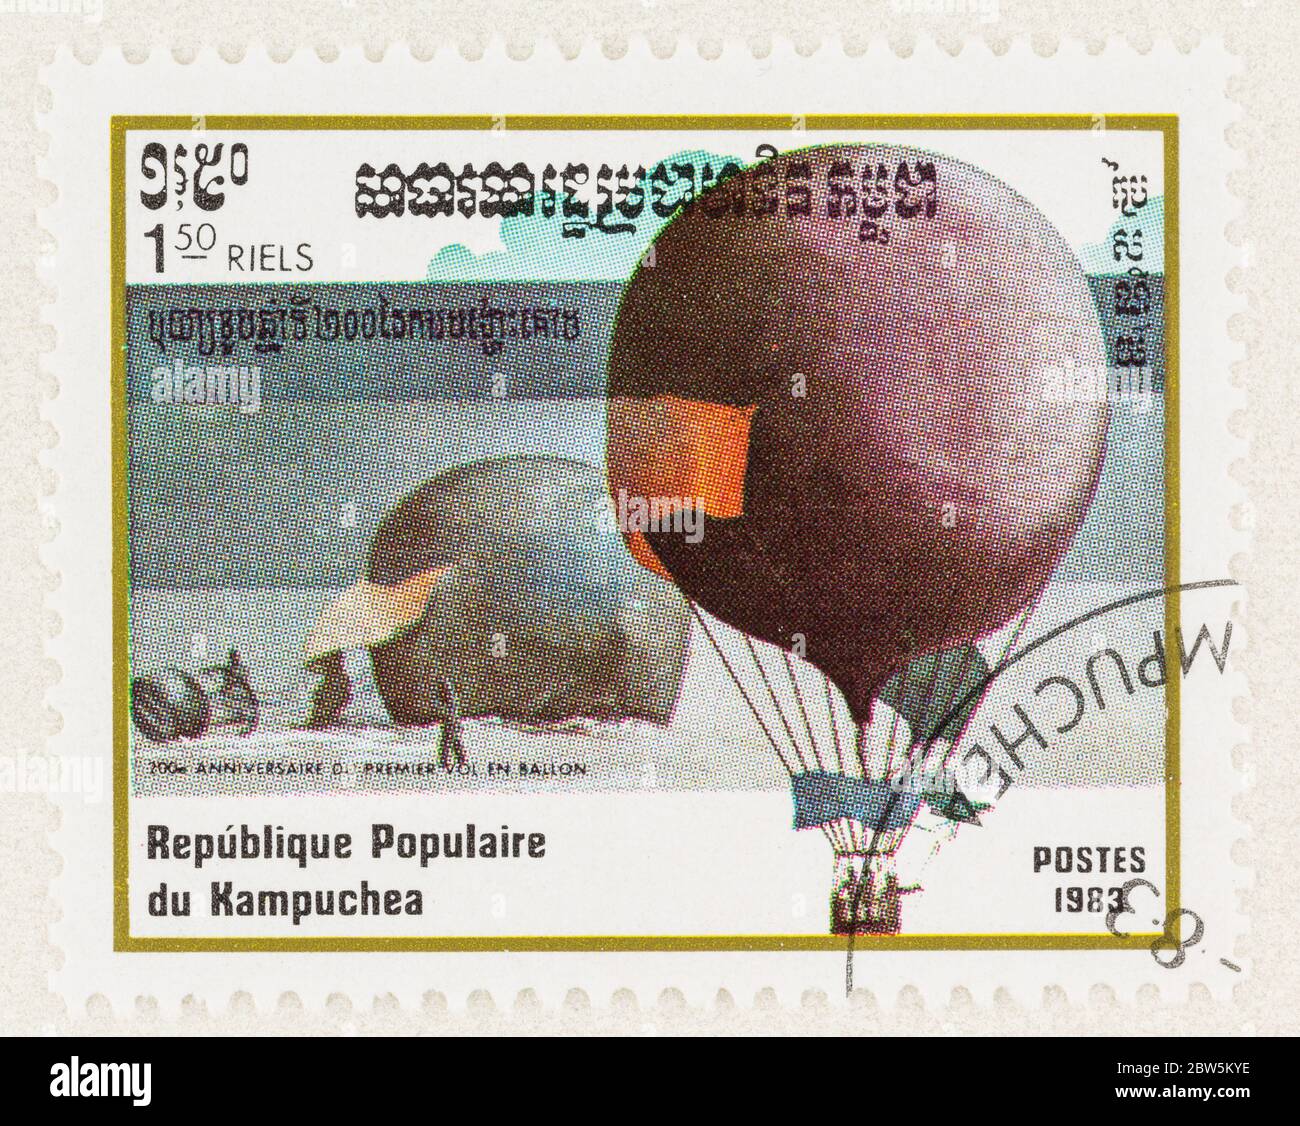 SEATTLE WASHINGTON - May 28, 2020: Cambodia stamp with 1897 hydrogen air balloon 'Oernen', The Eagle, an ill-fated Swedish Polar Expedition. Stock Photo